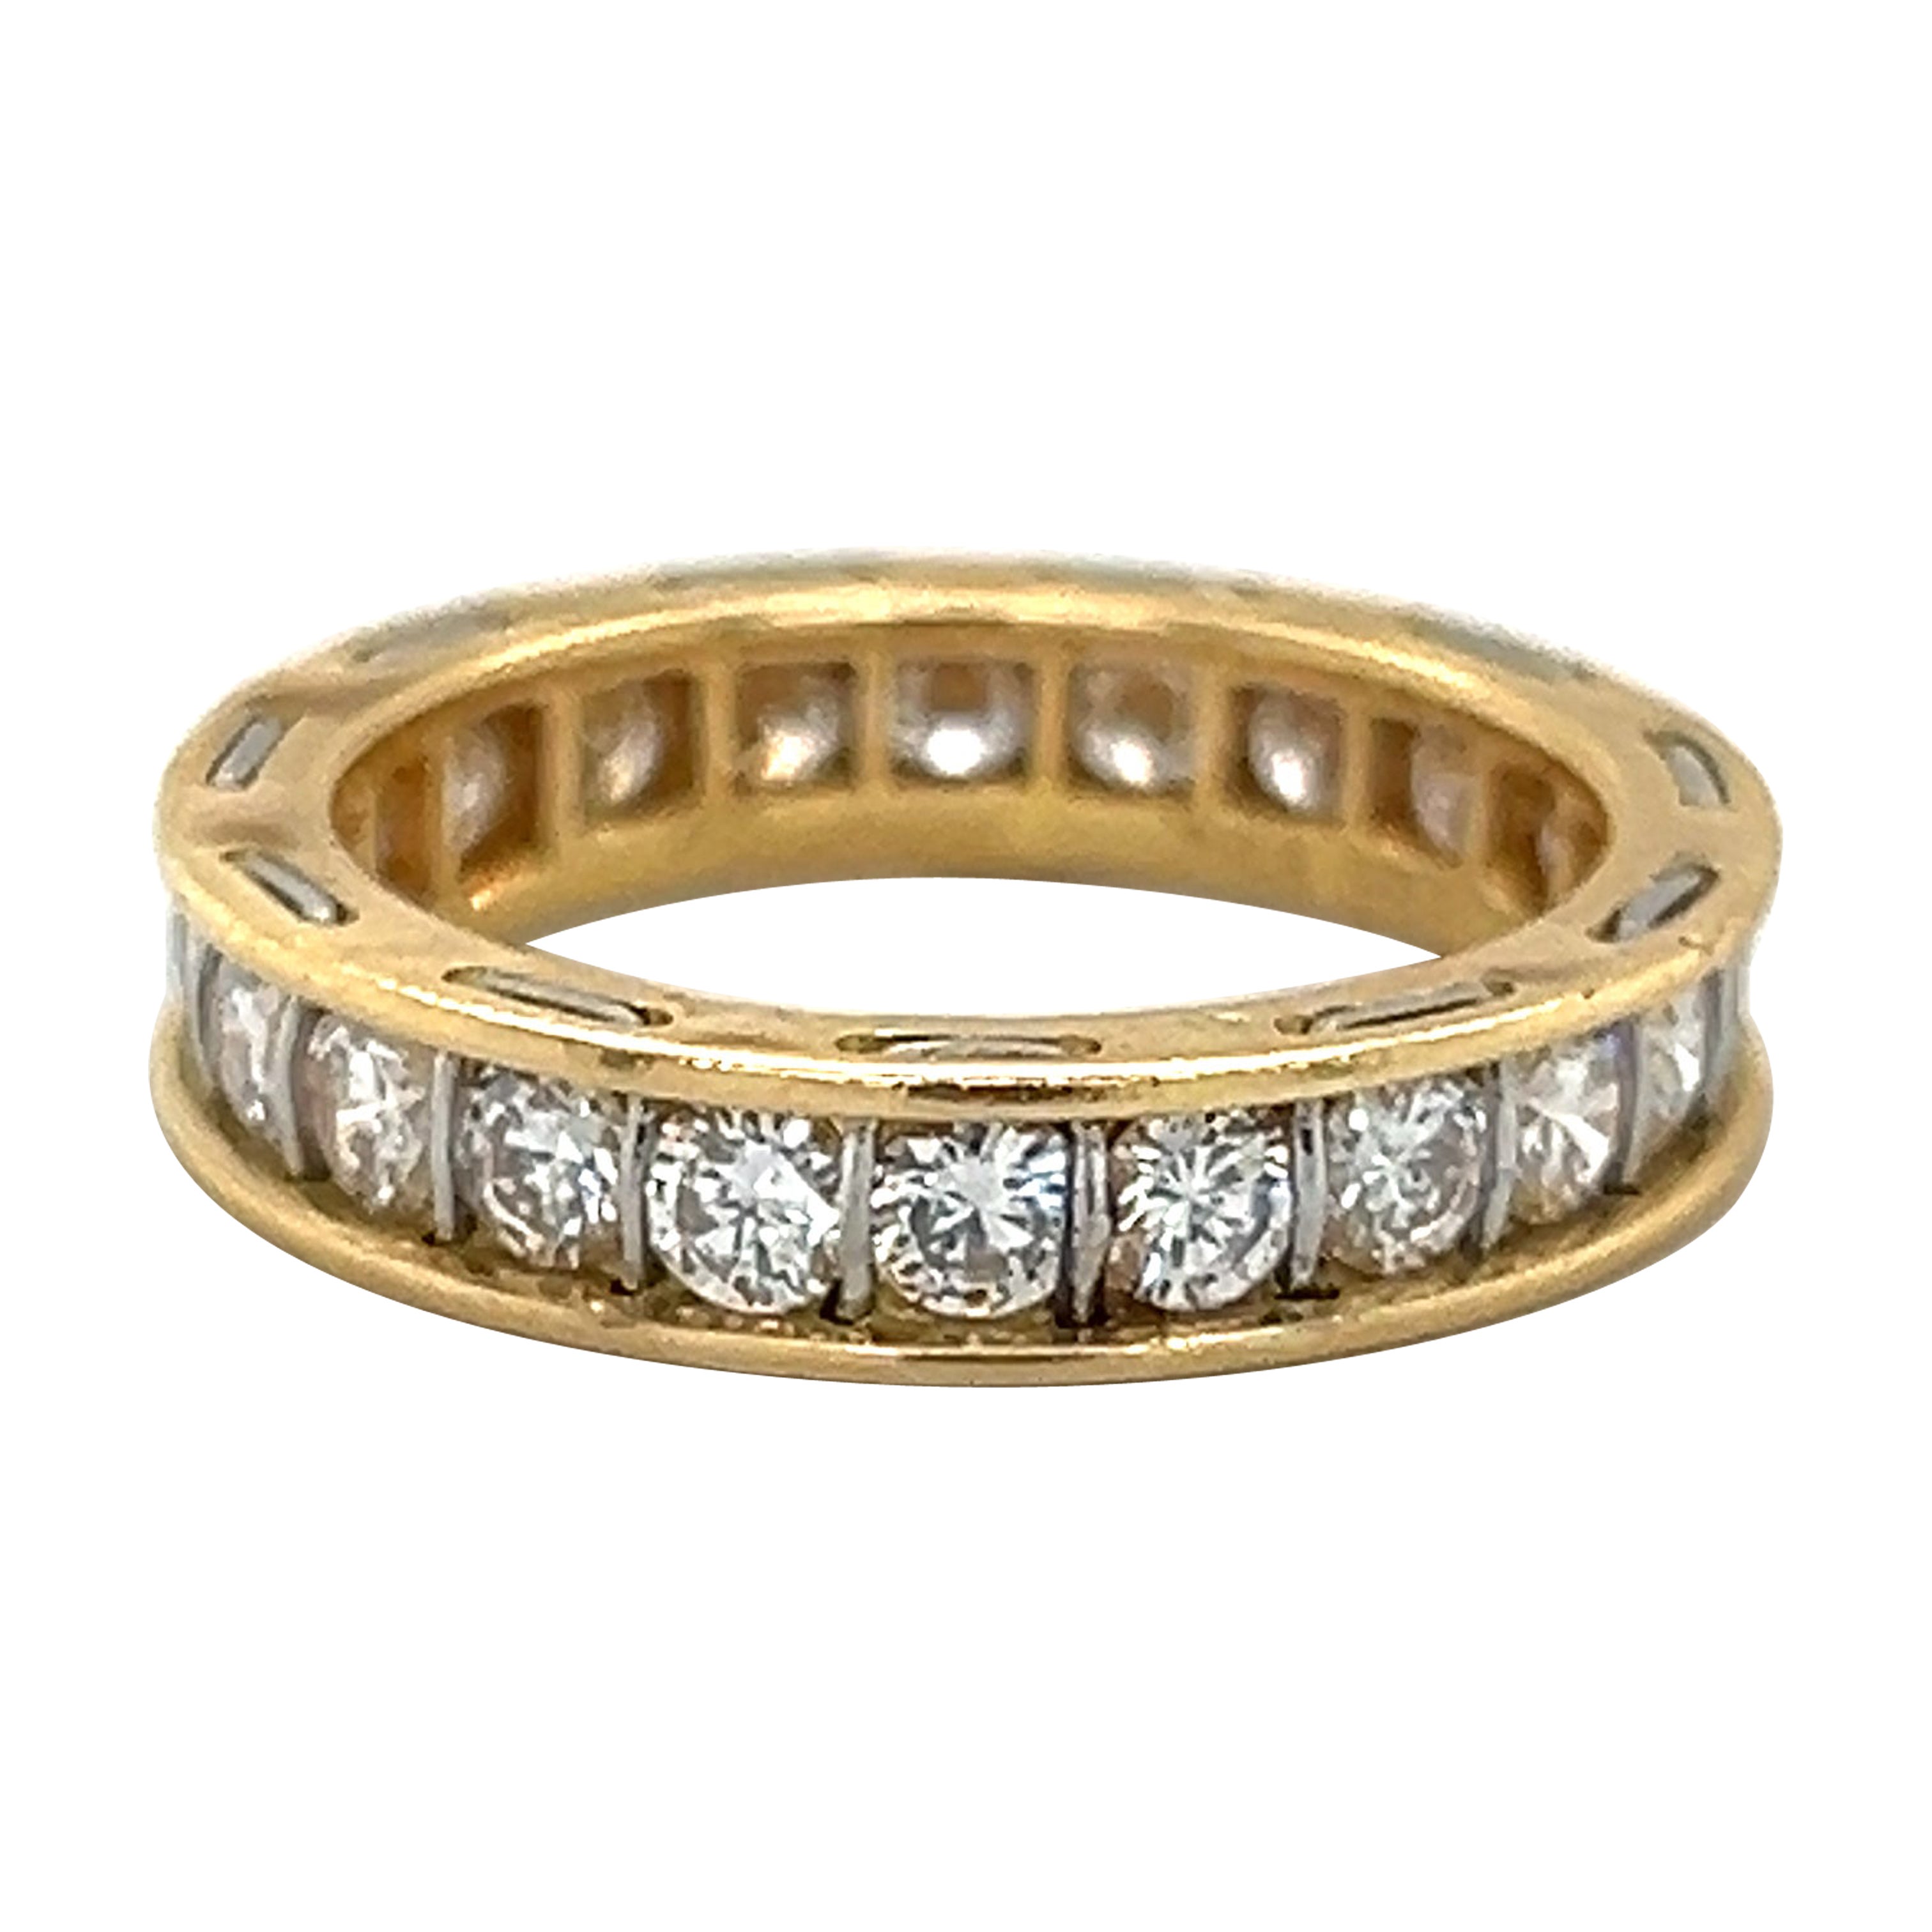 Vintage Cartier Diamond Eternity Ring 18k Yellow Gold Stackable Size 48